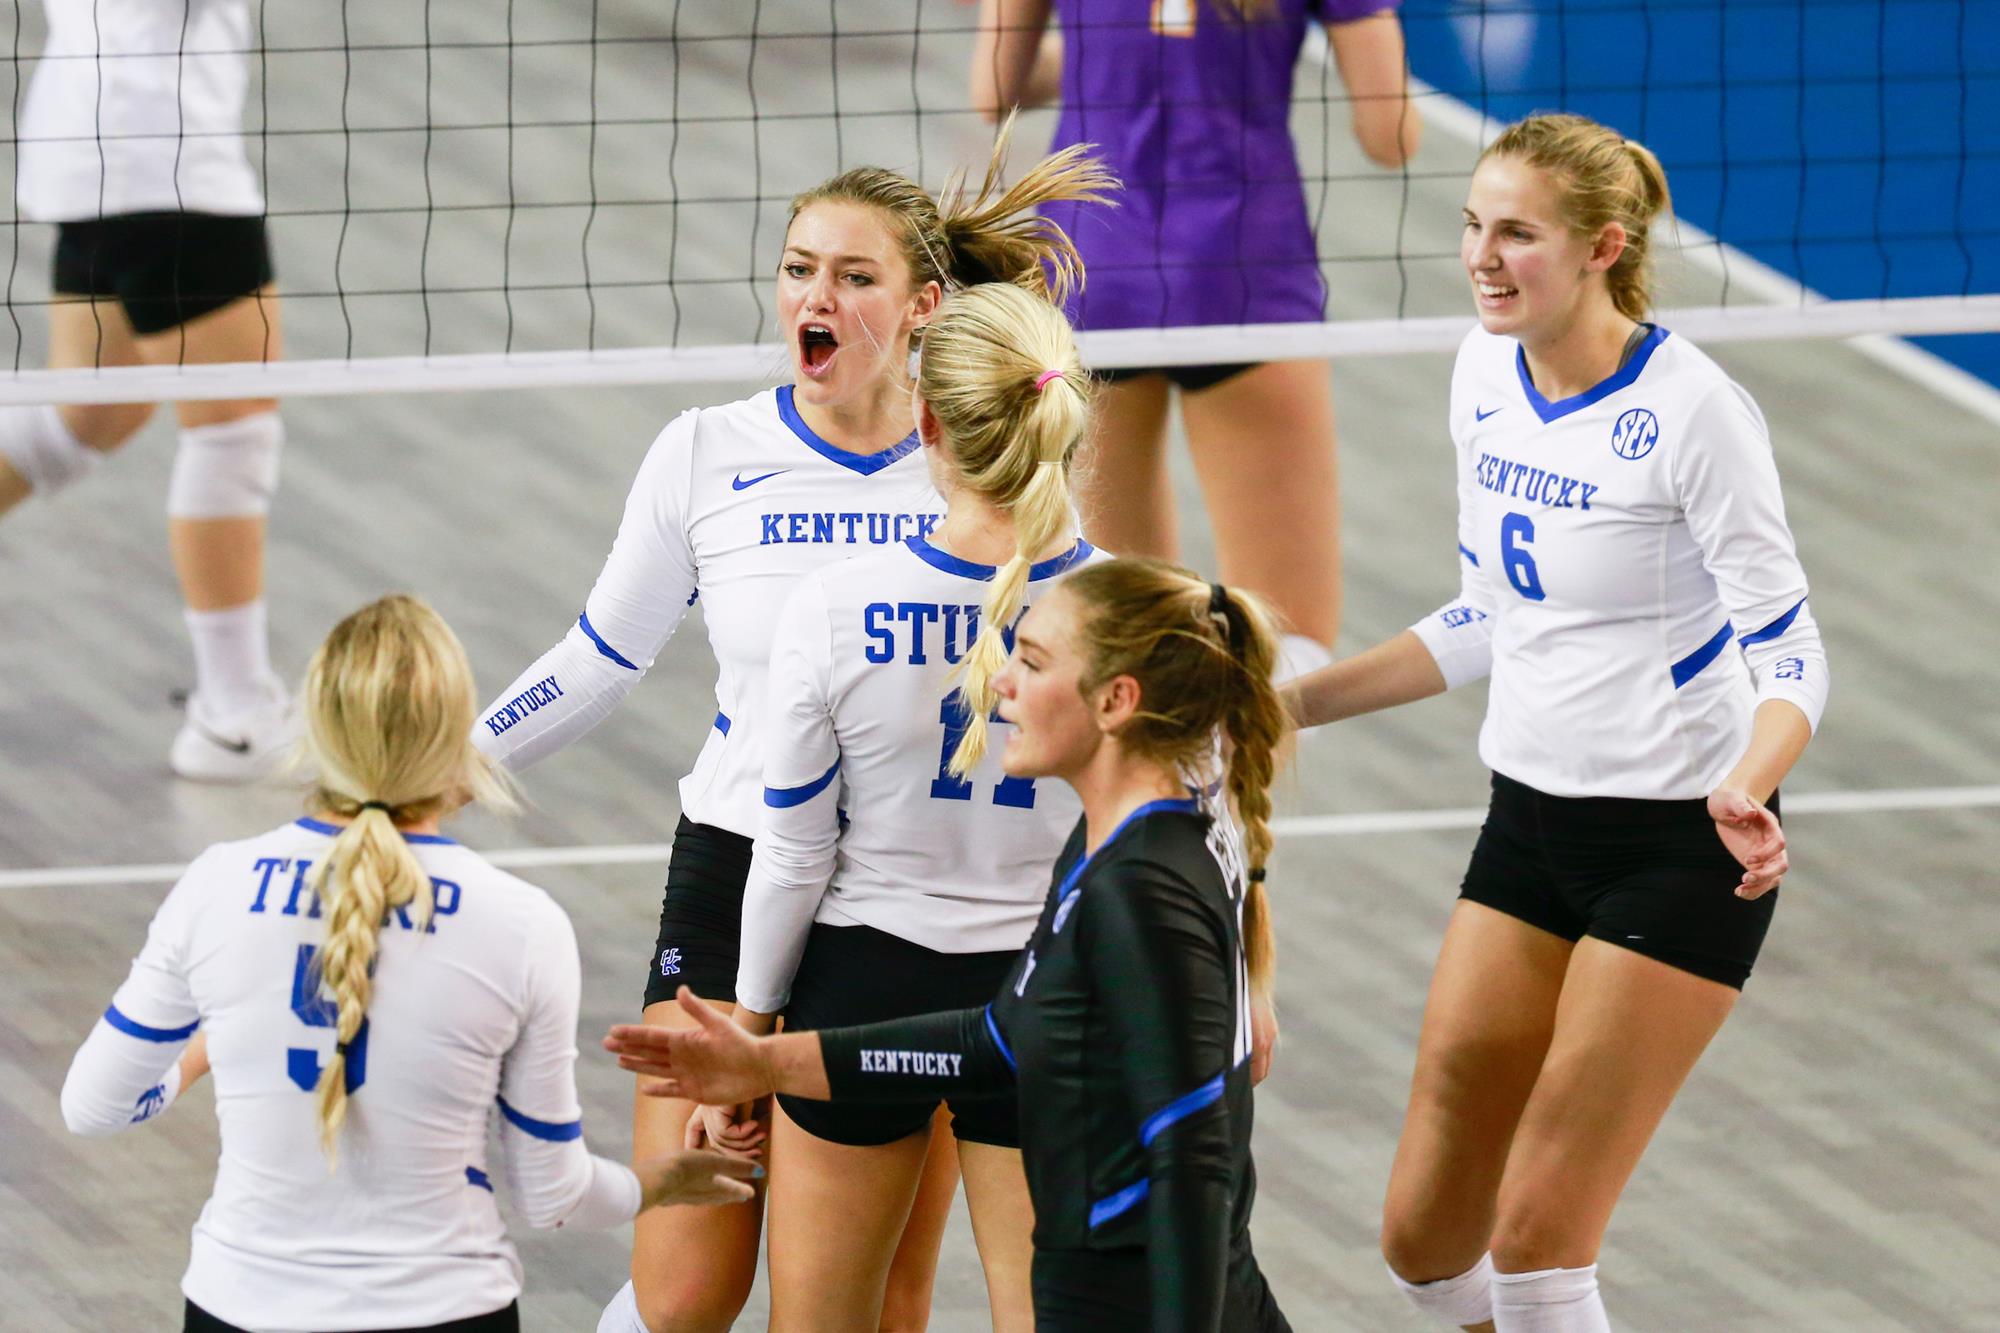 Most Unexpected Upsets in NCAA Women's Volleyball History